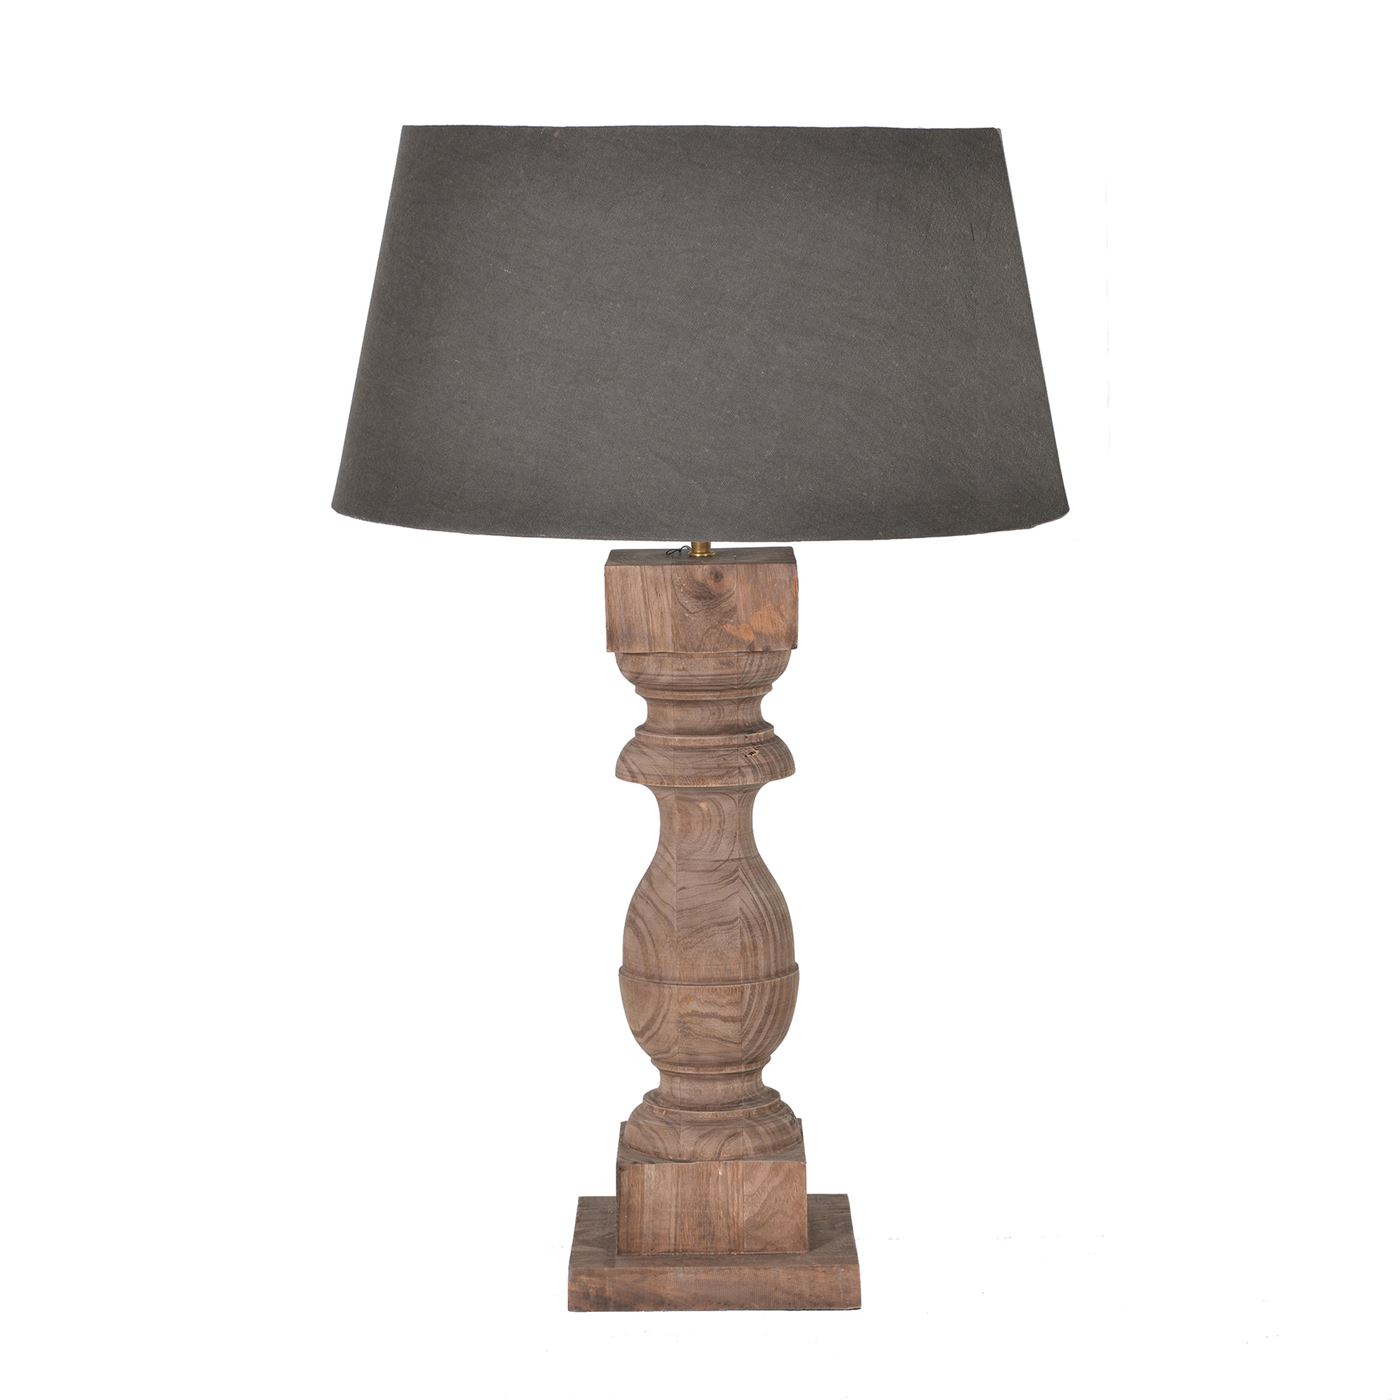 Weathered Wood Table Lamp, Neutral | Barker & Stonehouse